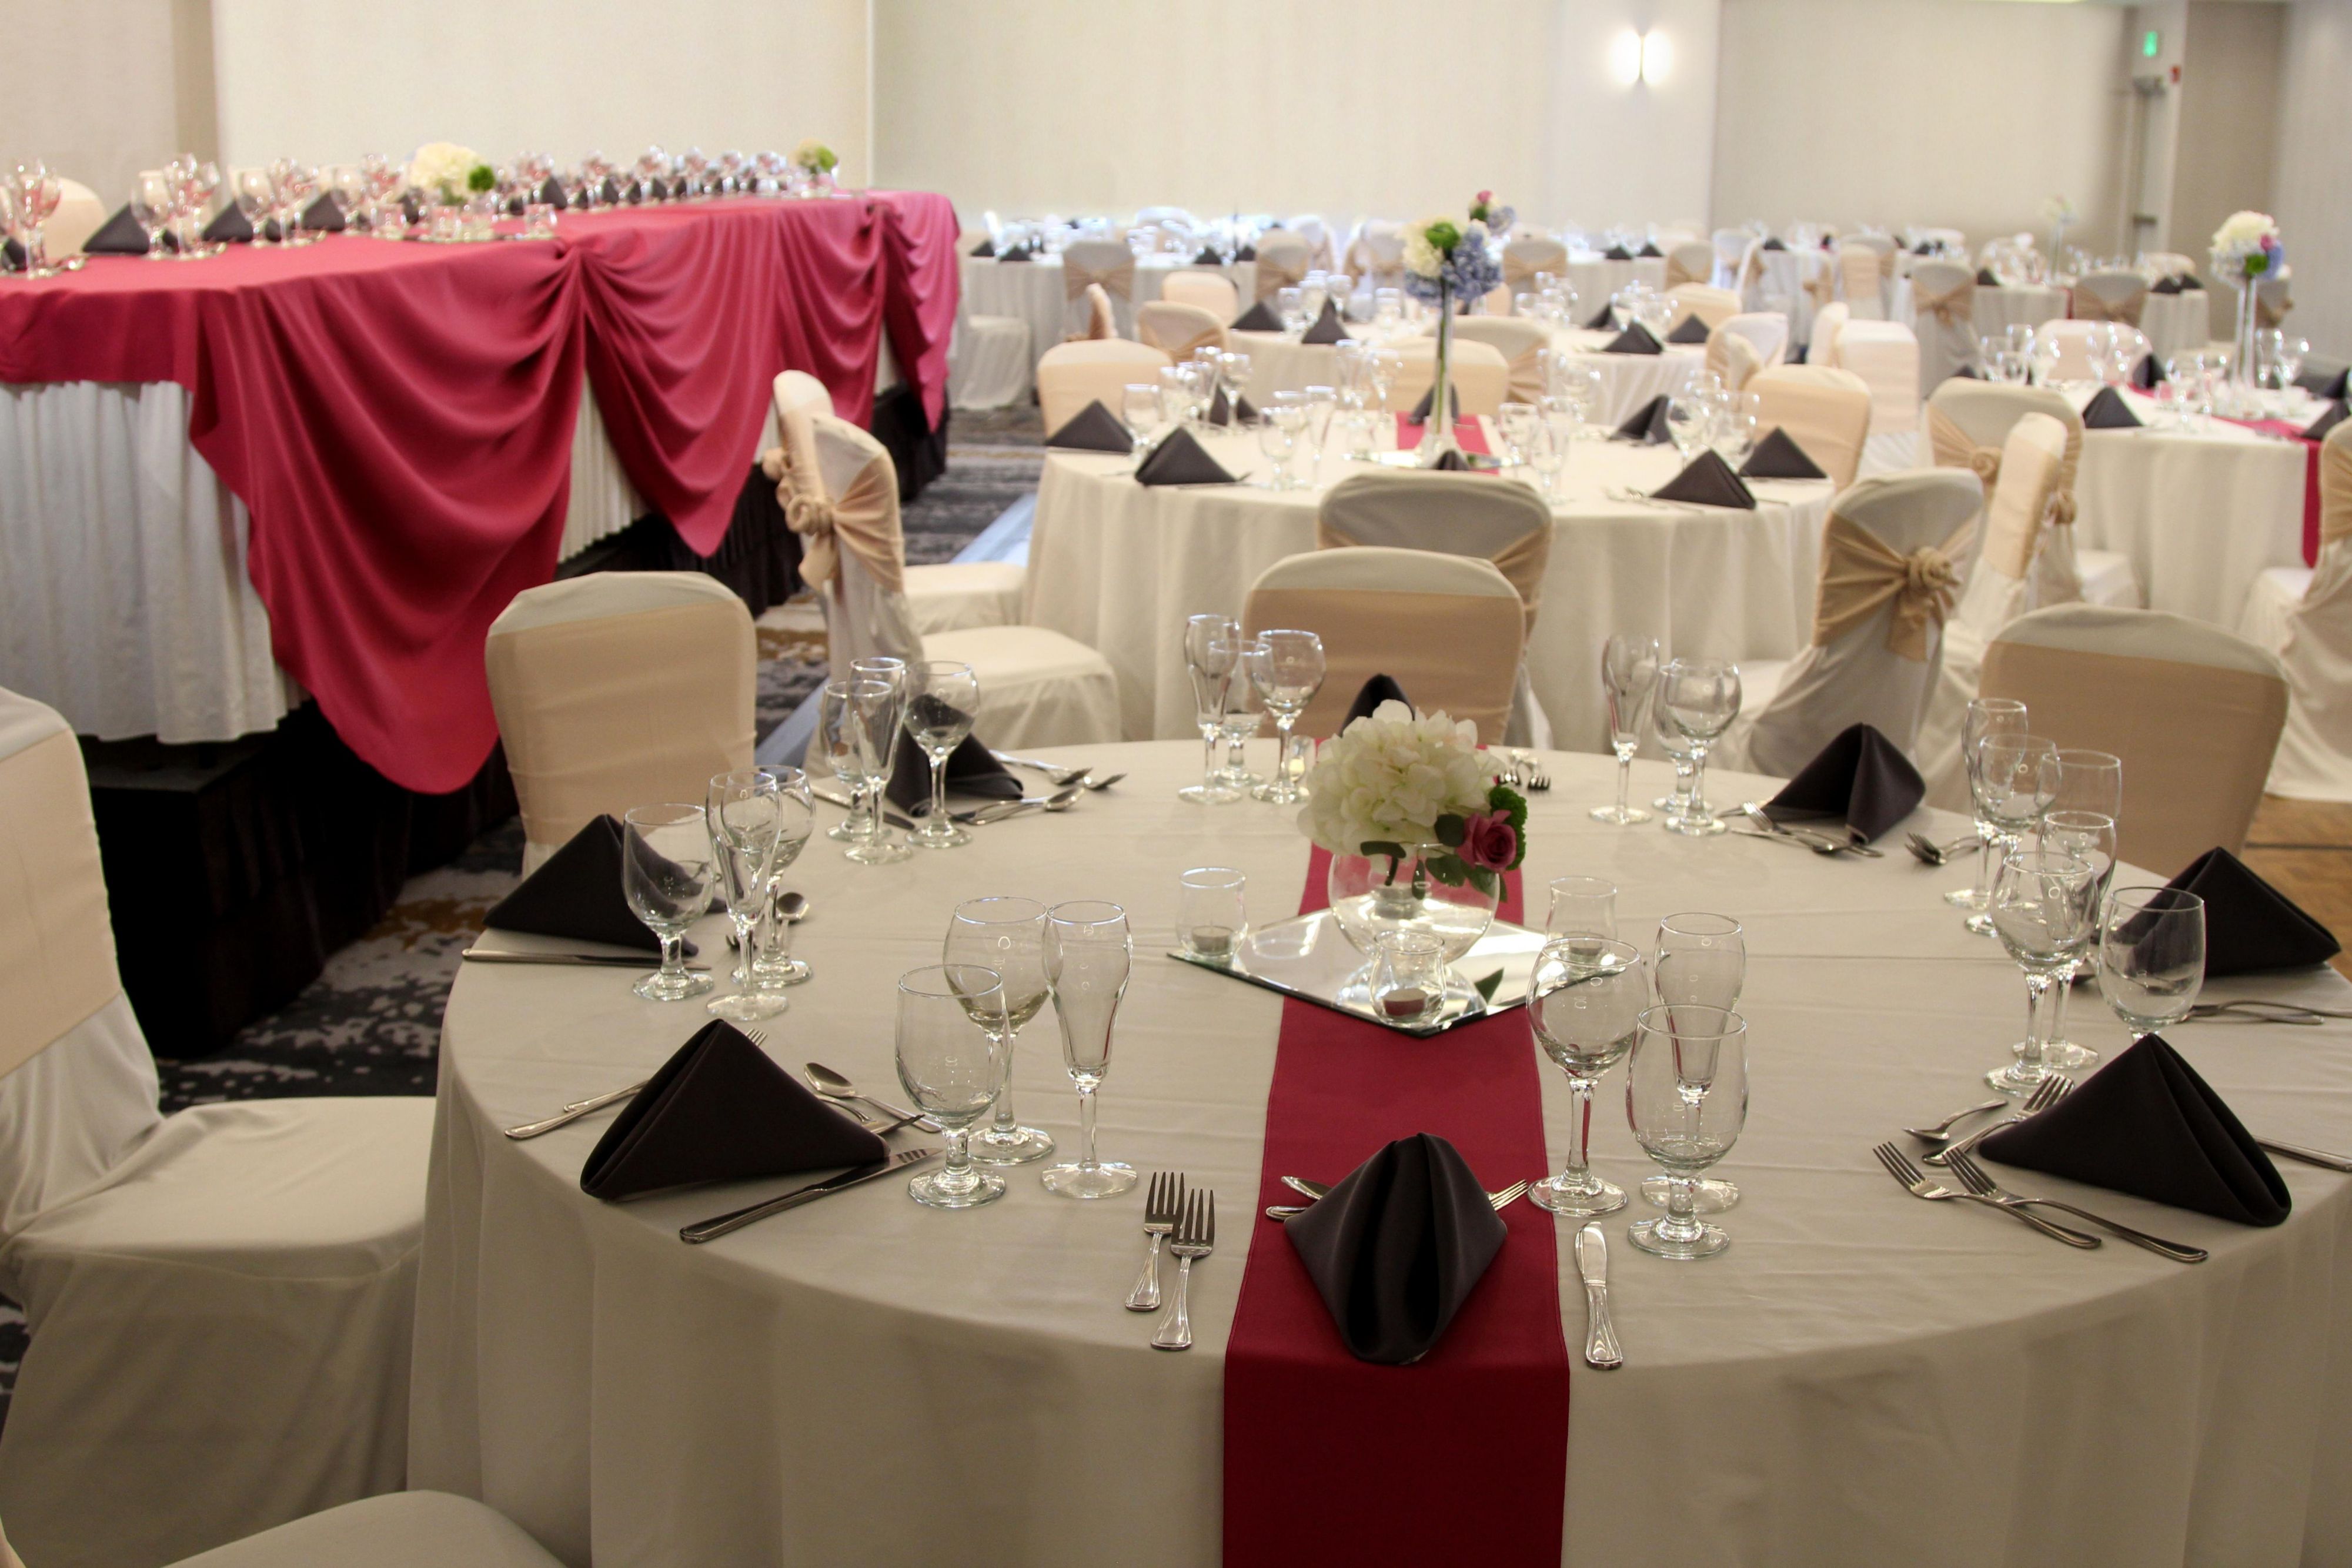 Let us plan your wedding - newly renovated Lincoln Ballroom